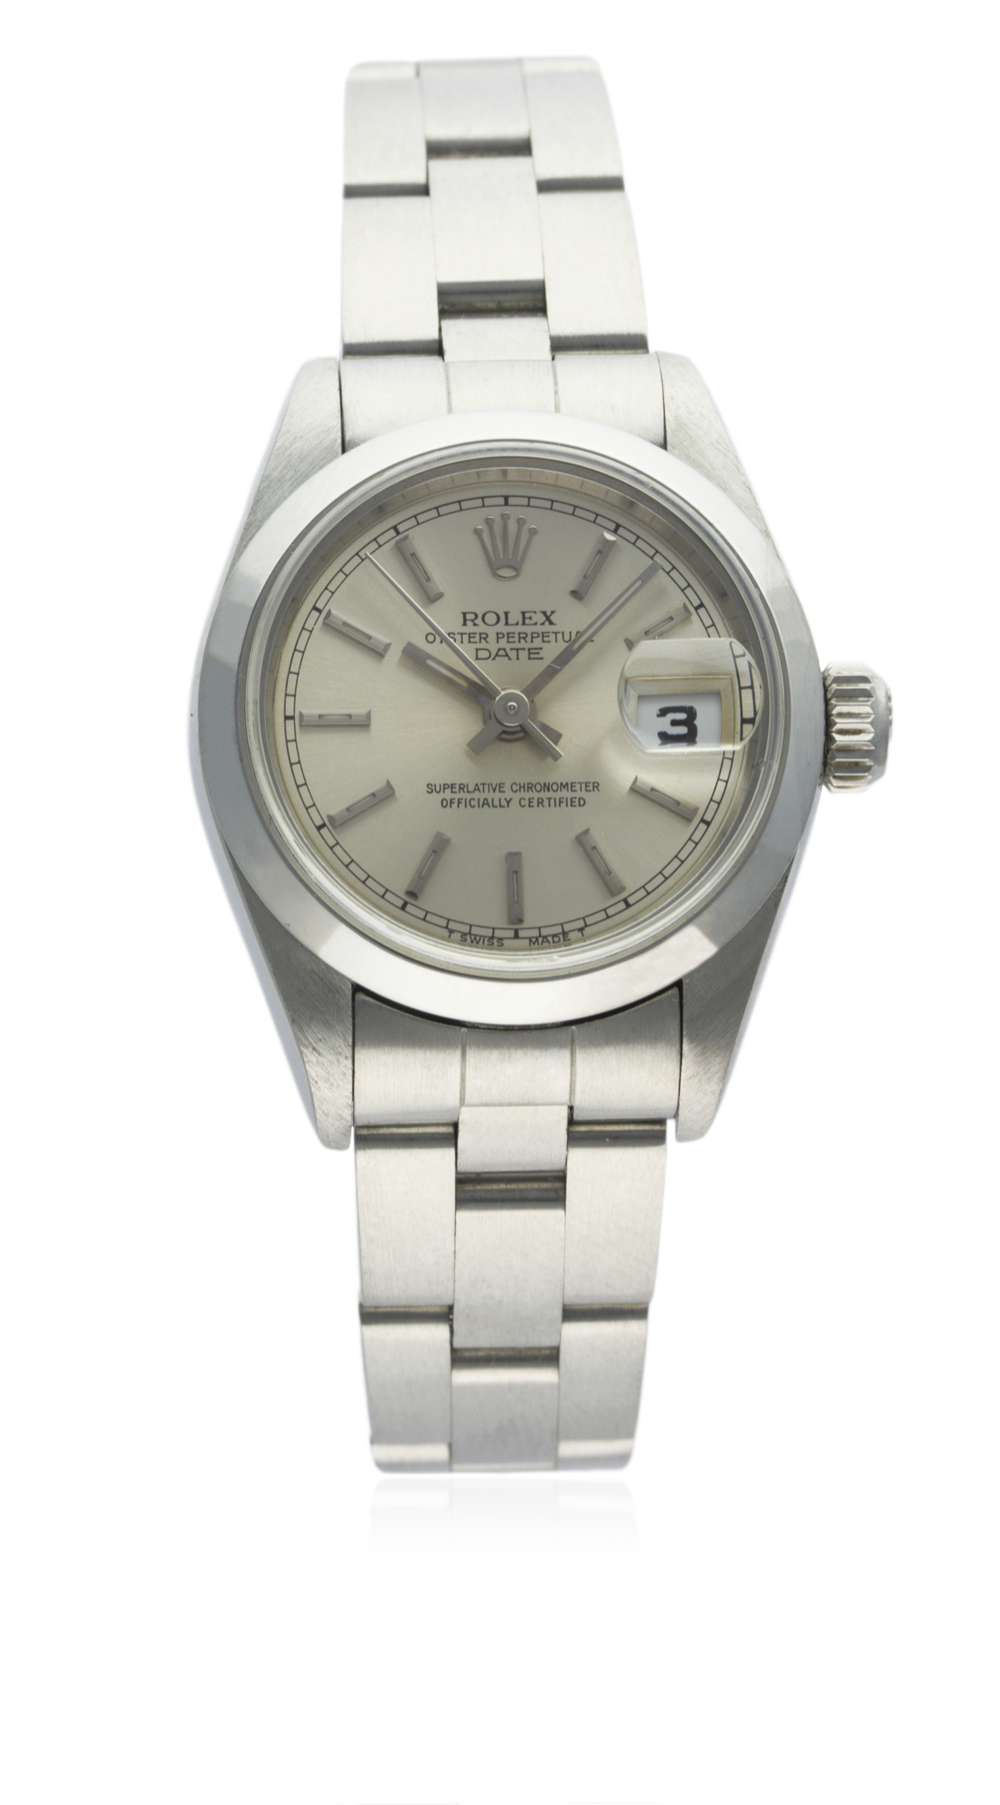 A LADIES STAINLESS STEEL ROLEX OYSTER PERPETUAL DATE BRACELET WATCH CIRCA 1993, REF. 69160 D: Silver